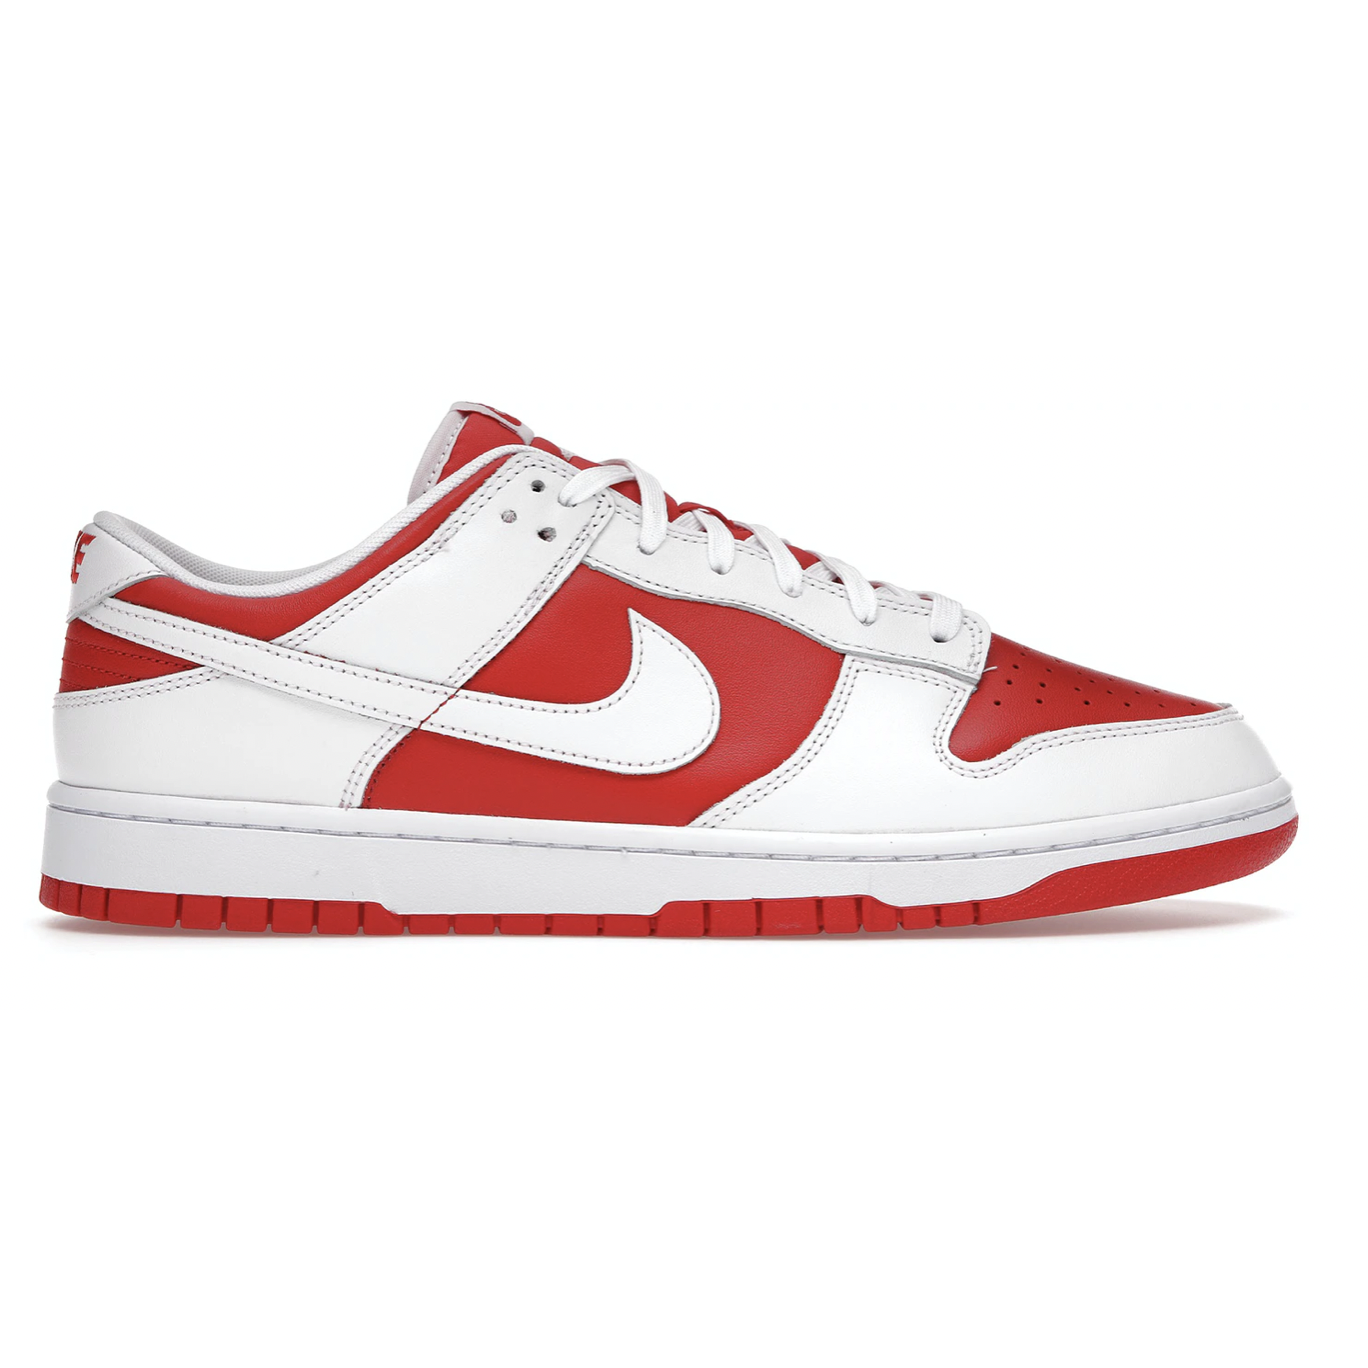 Nike Dunk Low Championship Red (2021) from Nike